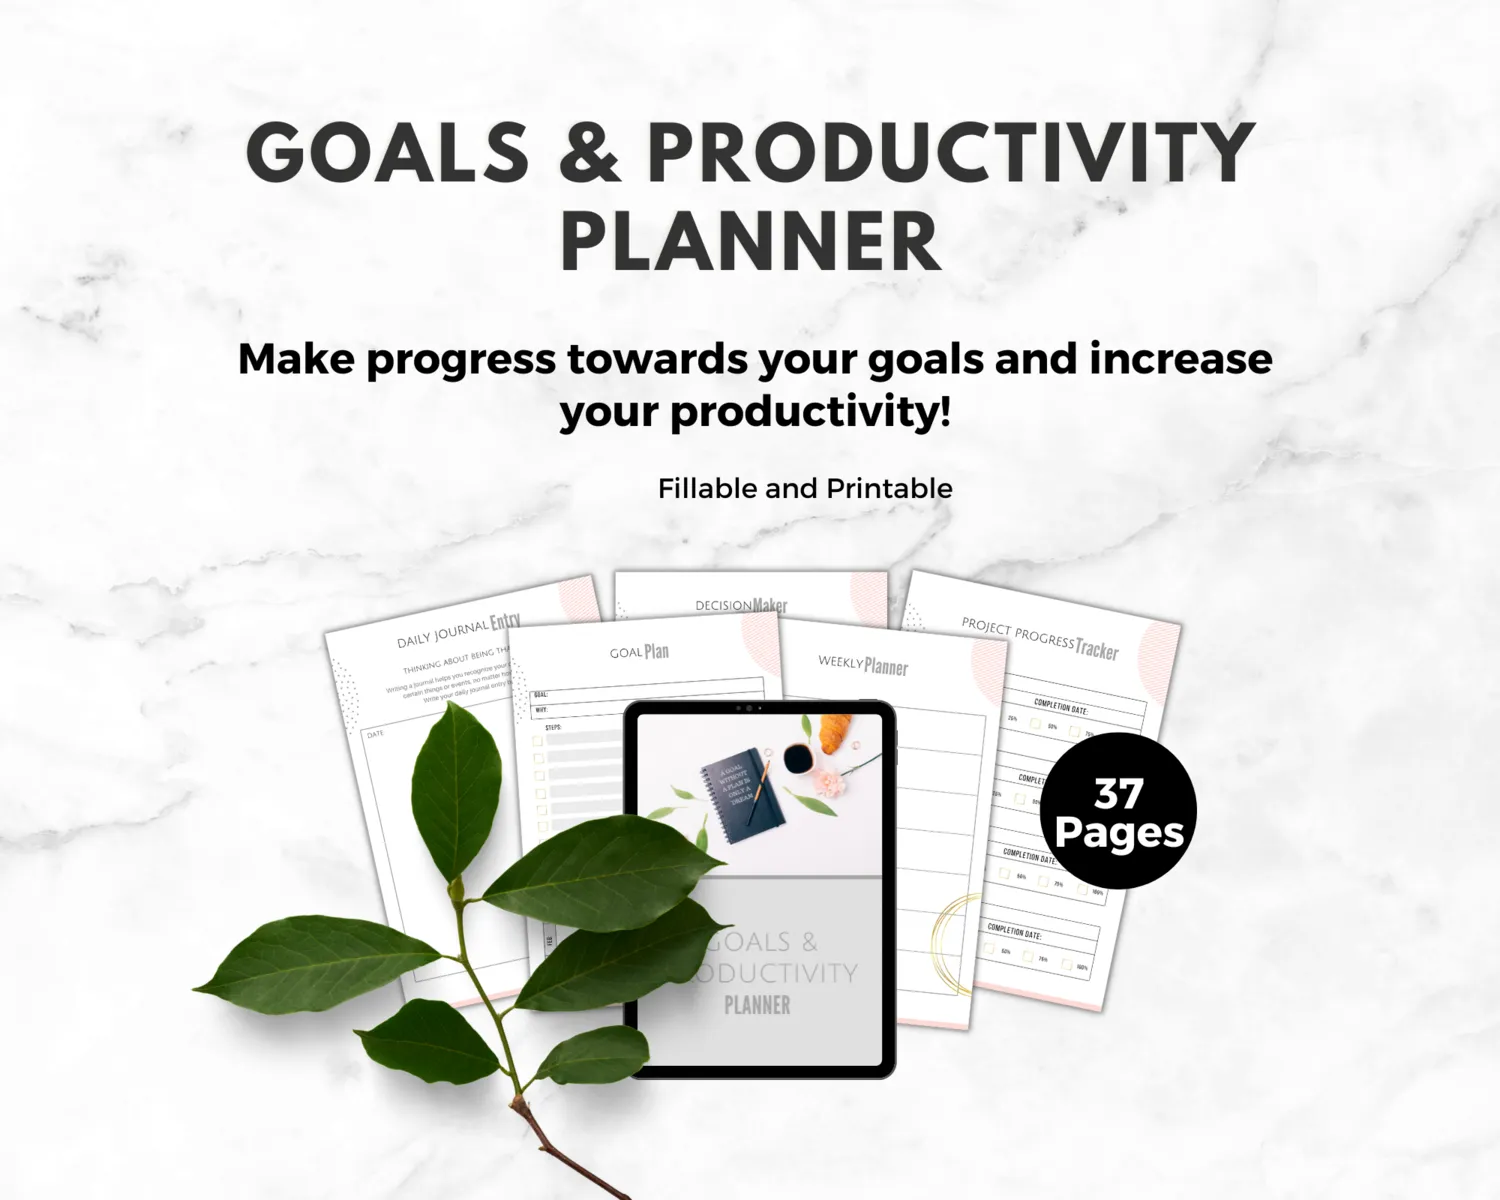 Goals & Productivity Planner | Achieve Your Dreams with Focus and Efficiency